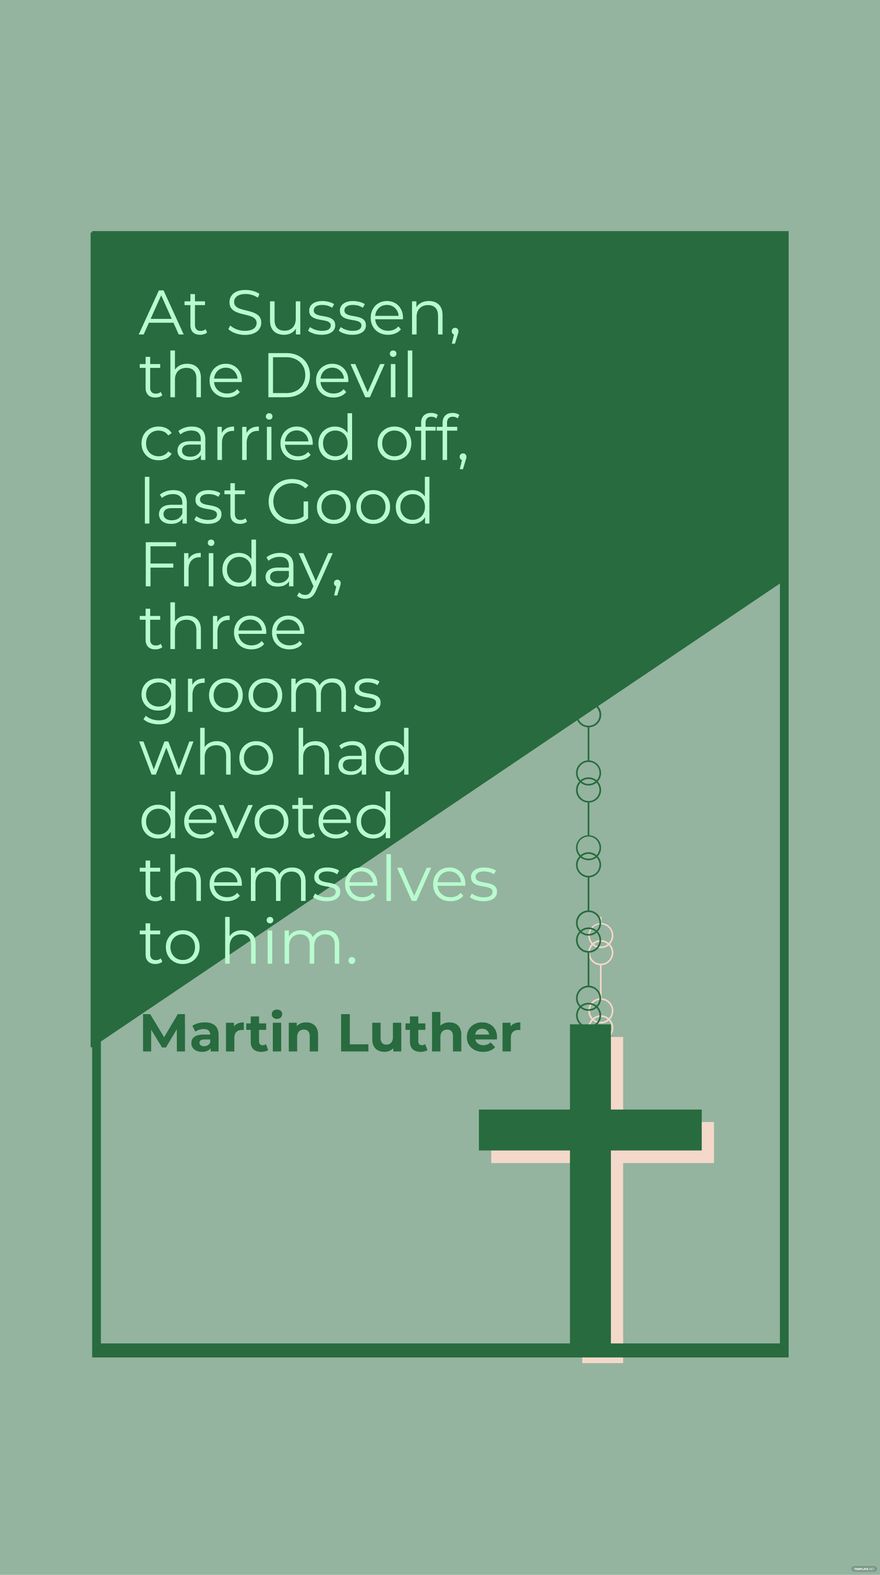 Martin Luther - At Sussen, the Devil carried off, last Good Friday, three grooms who had devoted themselves to him.